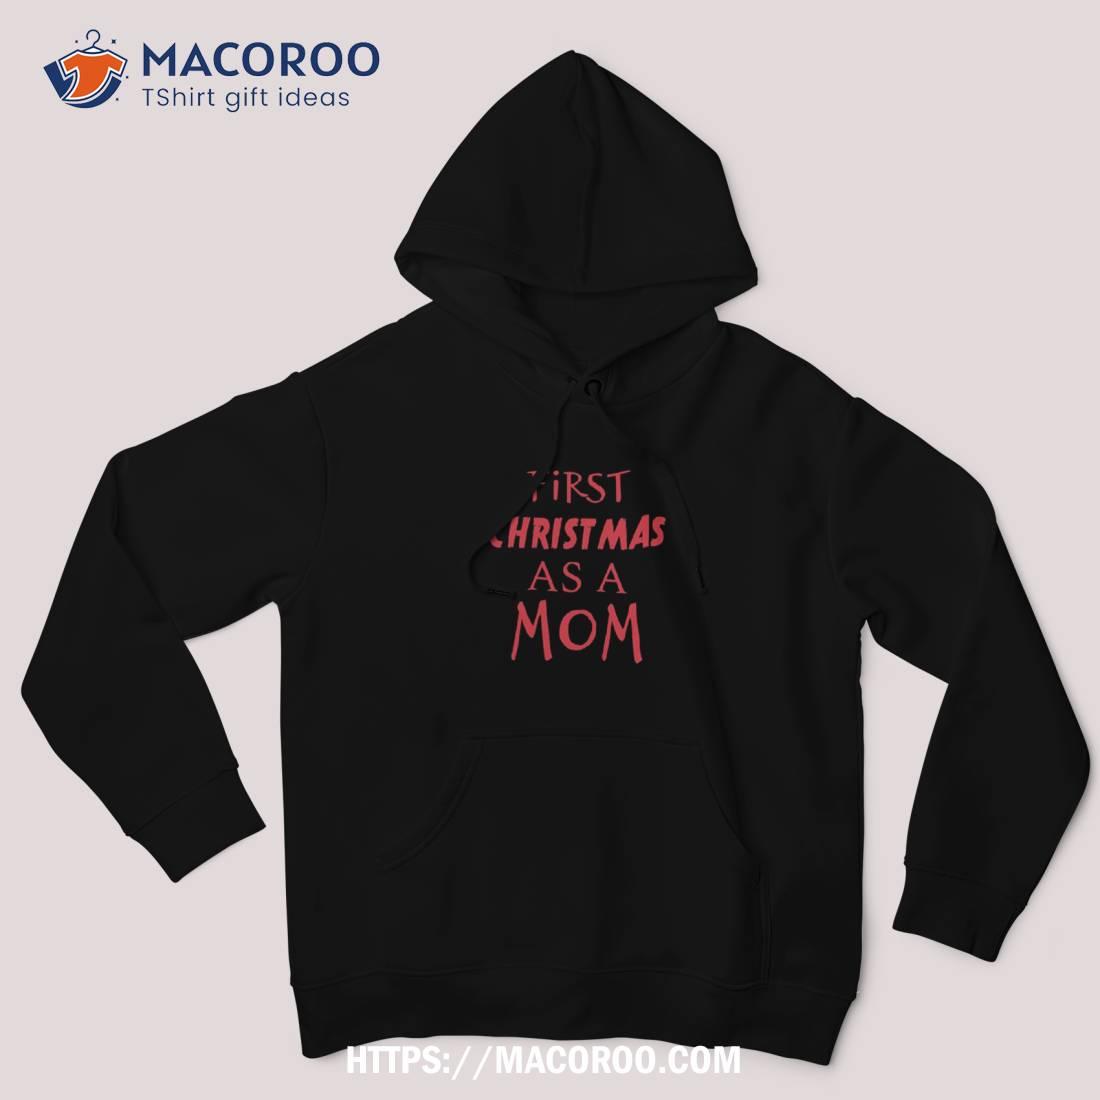 https://images.macoroo.com/wp-content/uploads/2023/08/first-christmas-as-a-mom-design-shirt-step-mom-gifts-for-christmas-hoodie.jpg